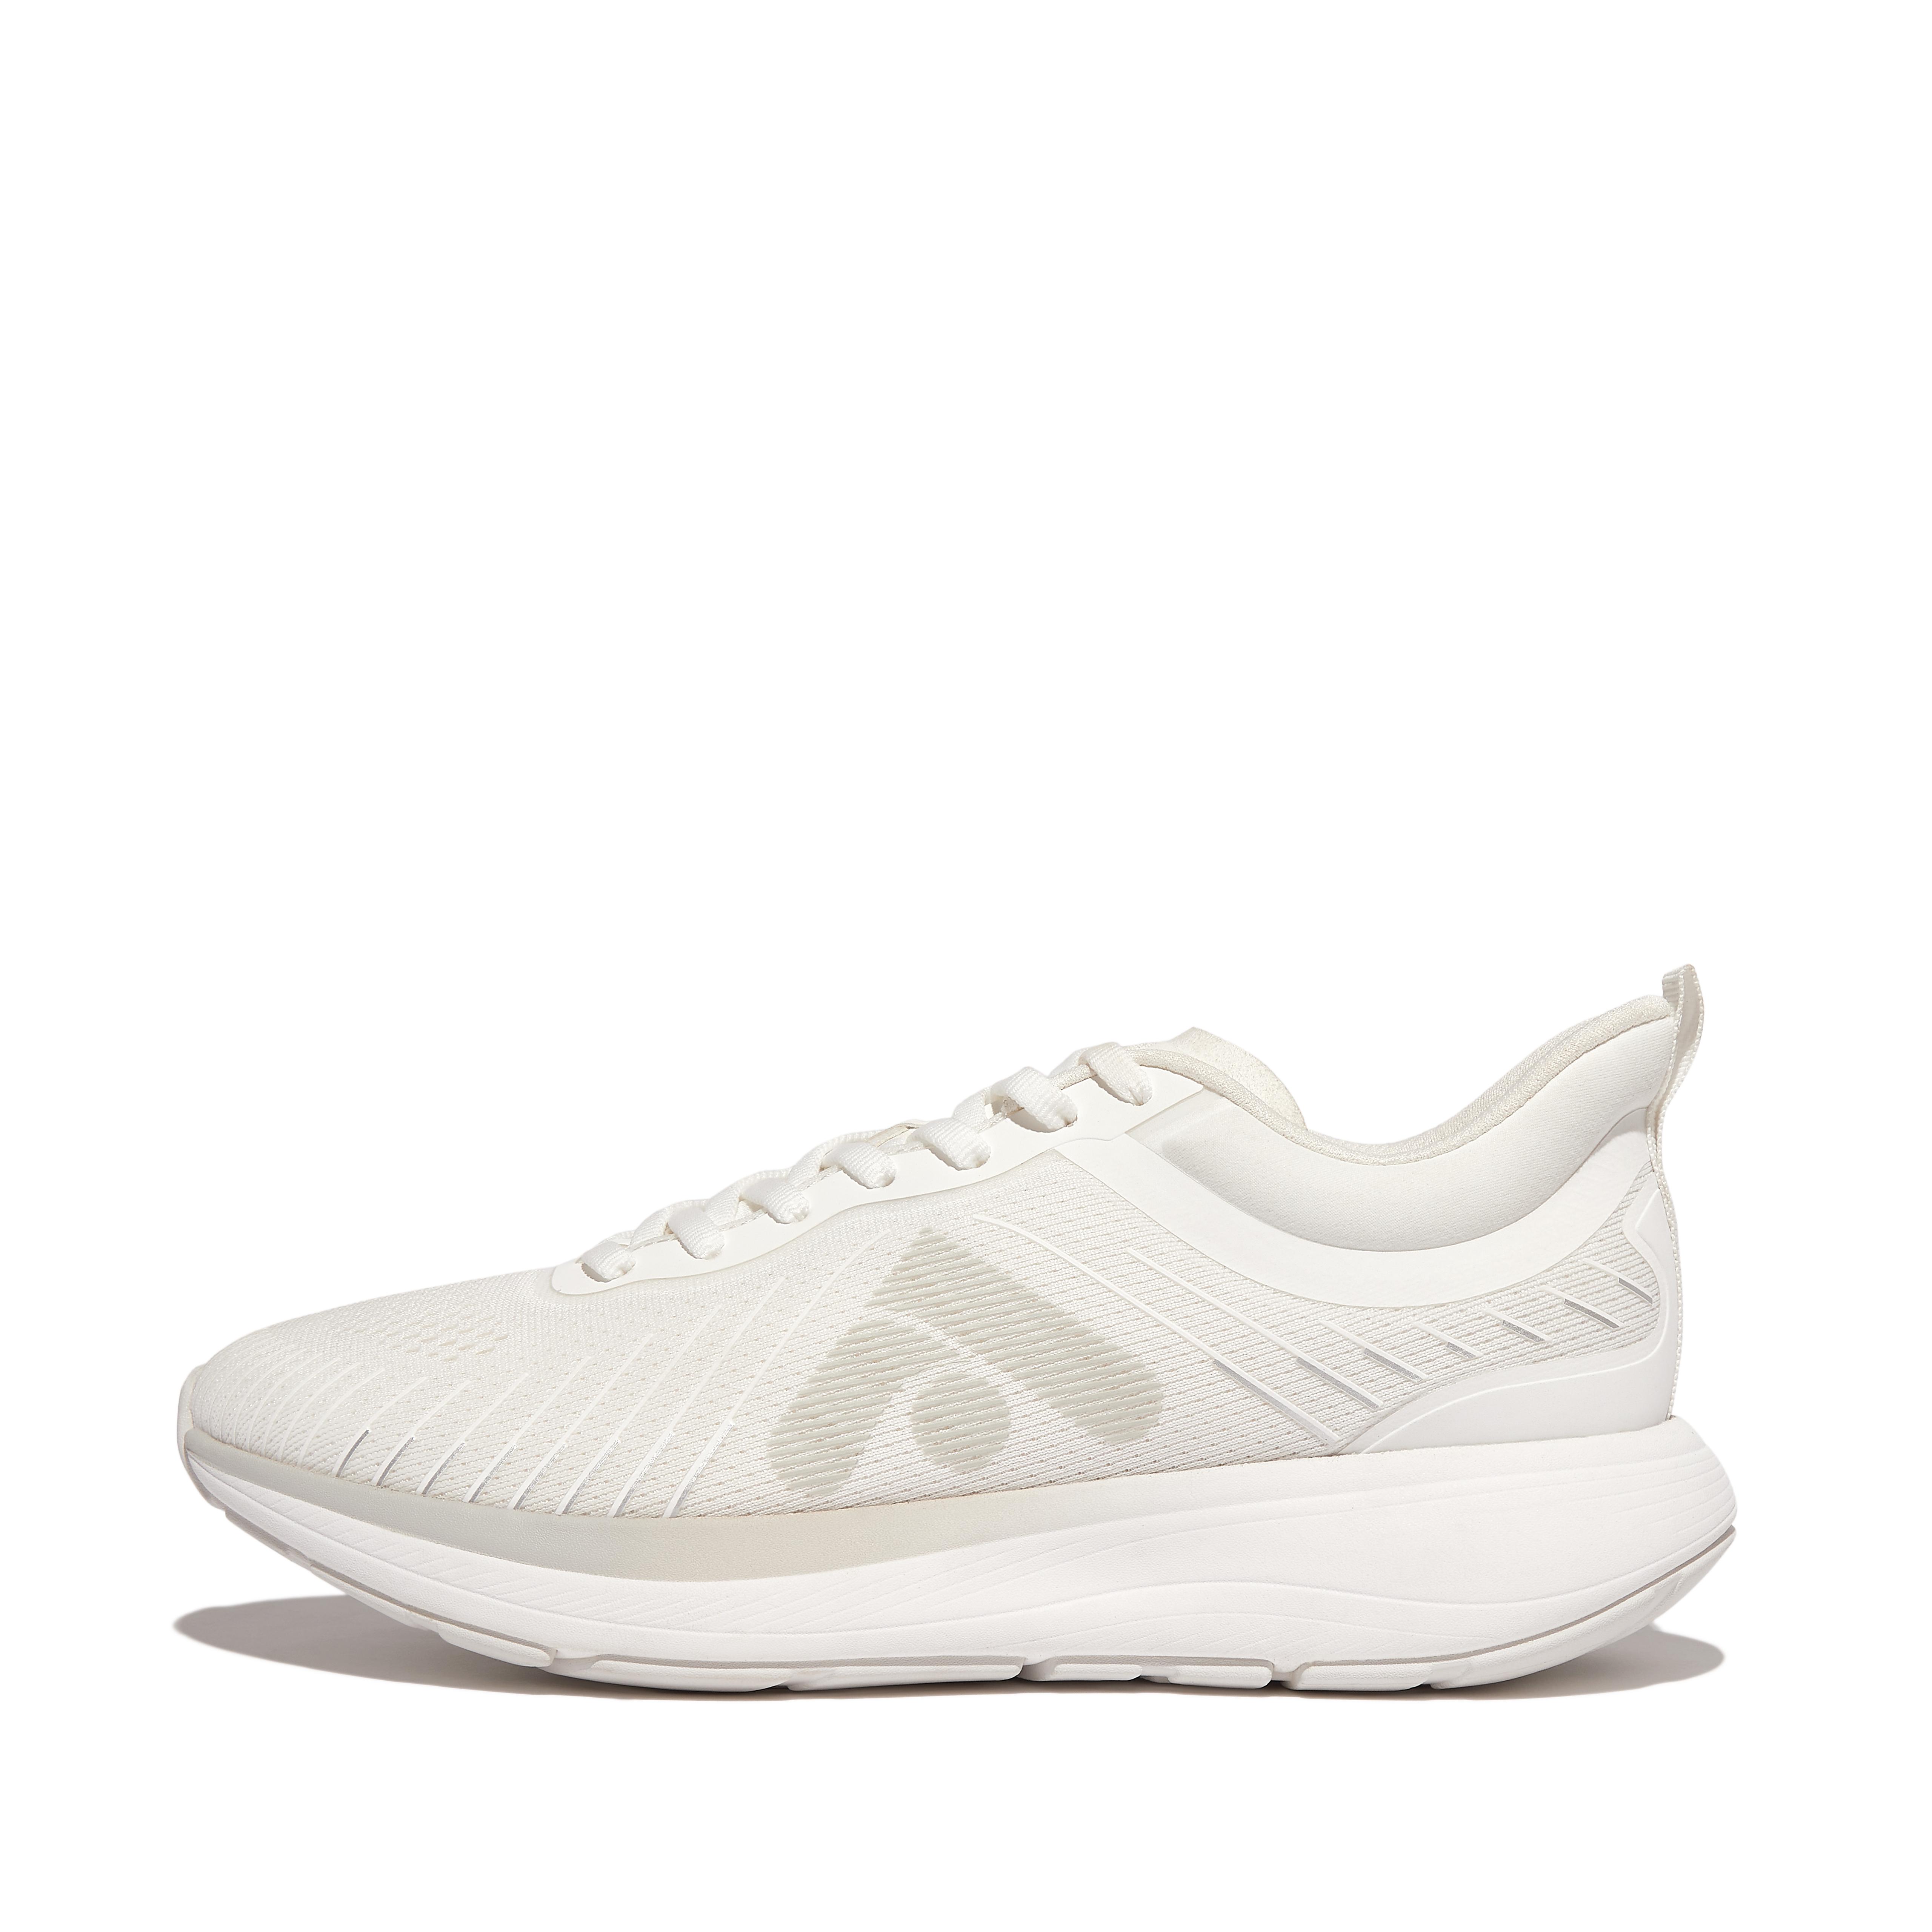 Fitflop Mesh Running/Sports Sneakers,Urban White